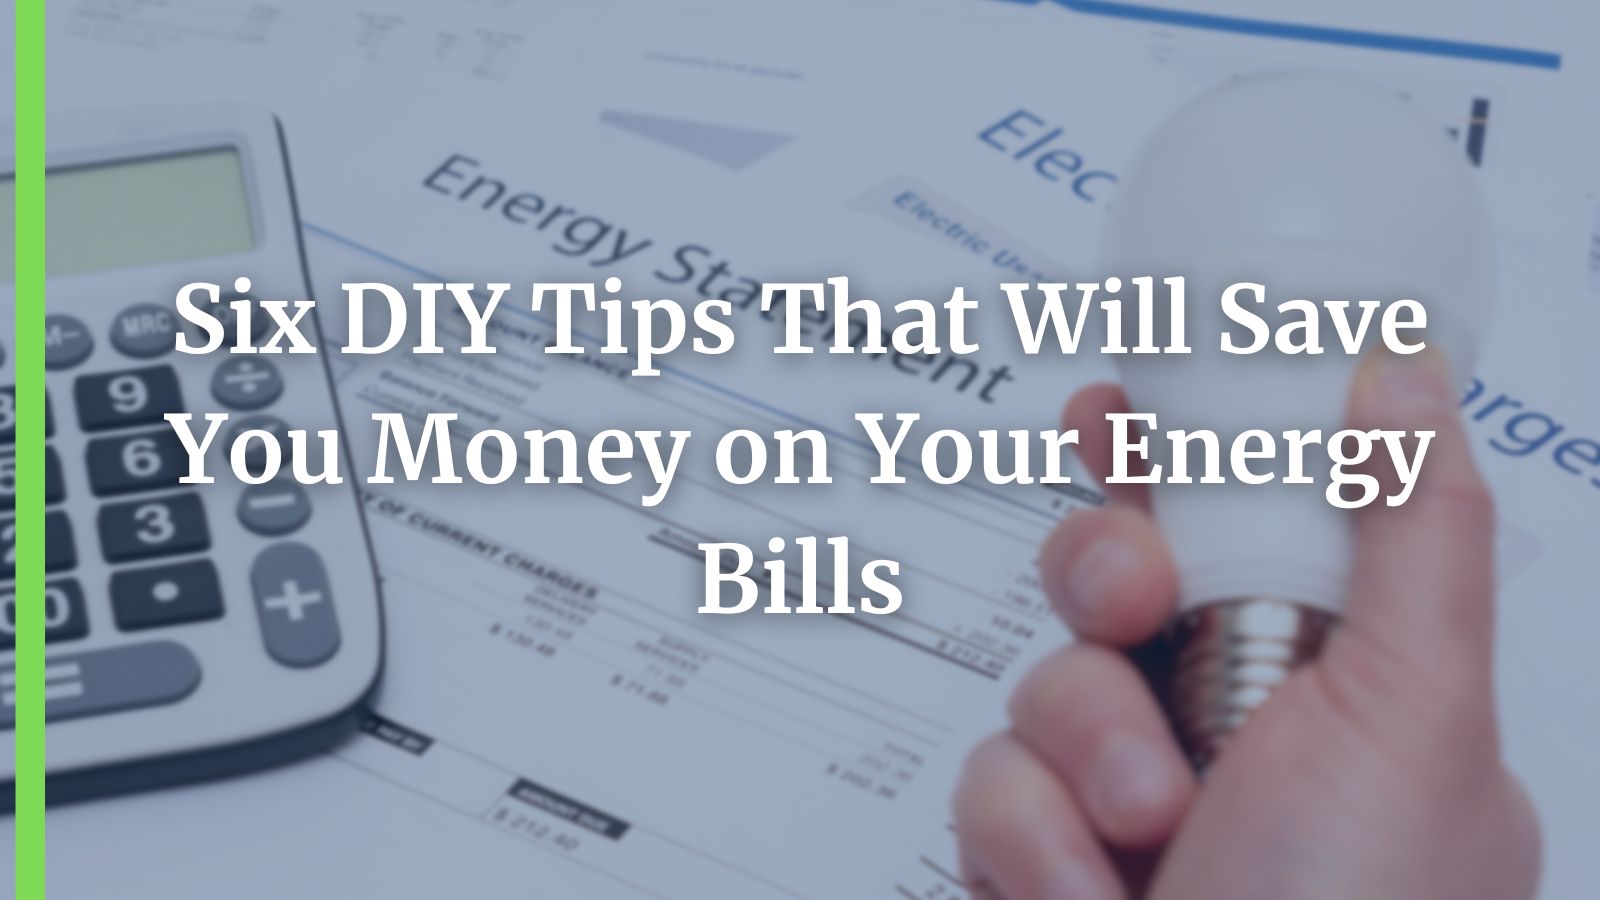 Six DIY Tips That Will Save You Money on Your Energy Bills